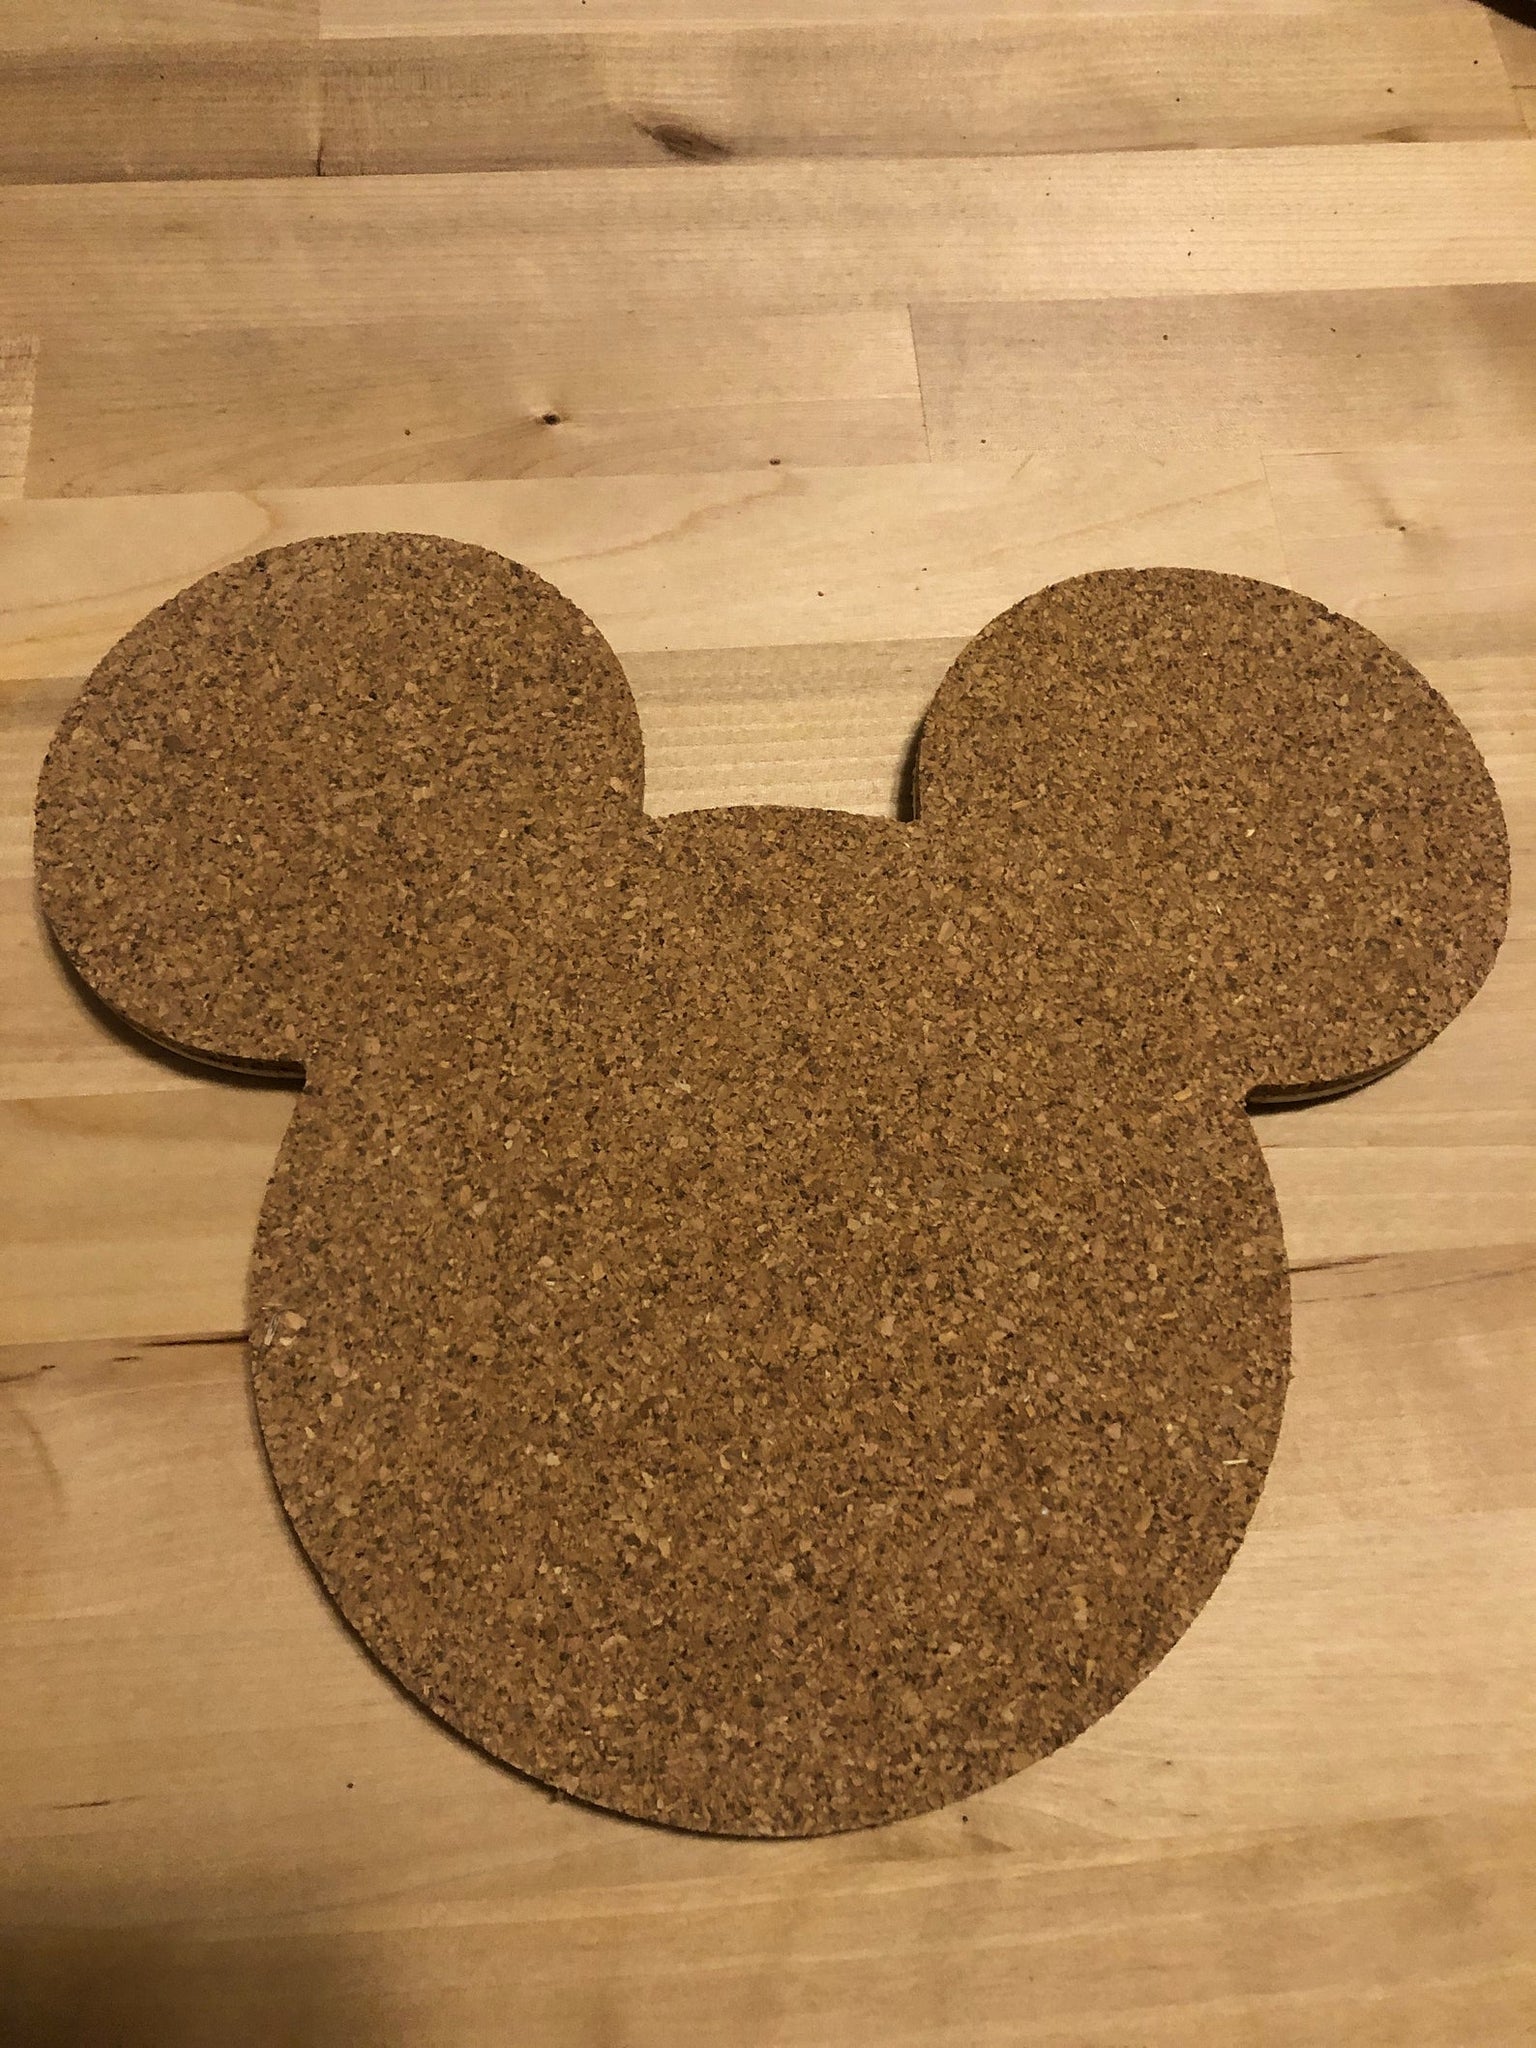 Mickey Mouse-Inspired Cork Pin Board – Planet Fan Cave